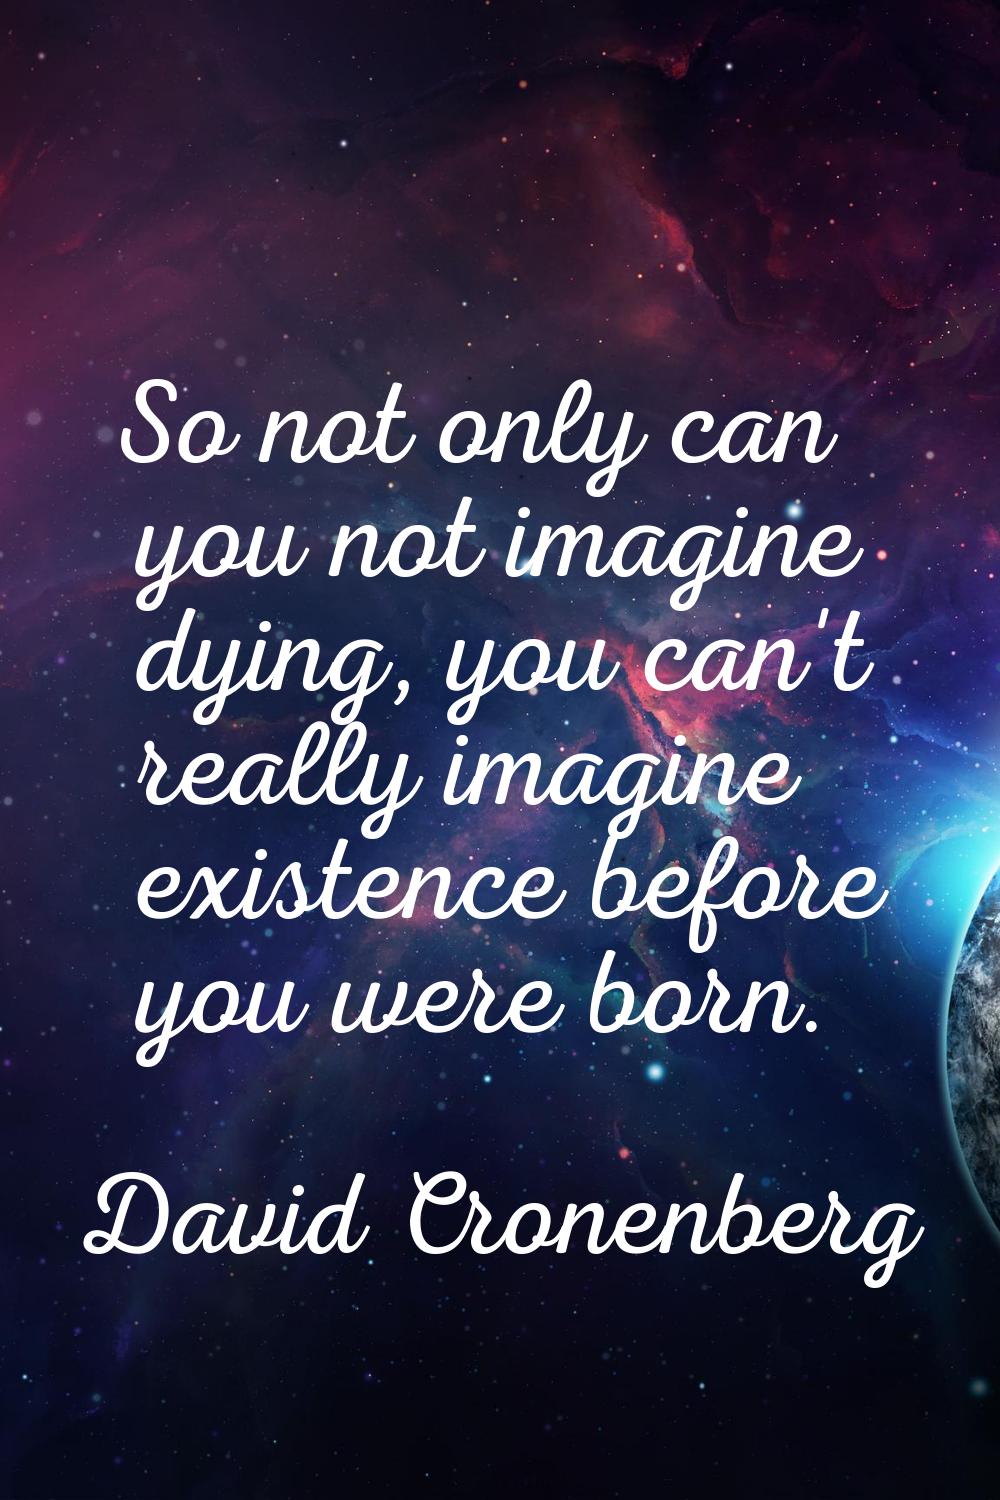 So not only can you not imagine dying, you can't really imagine existence before you were born.